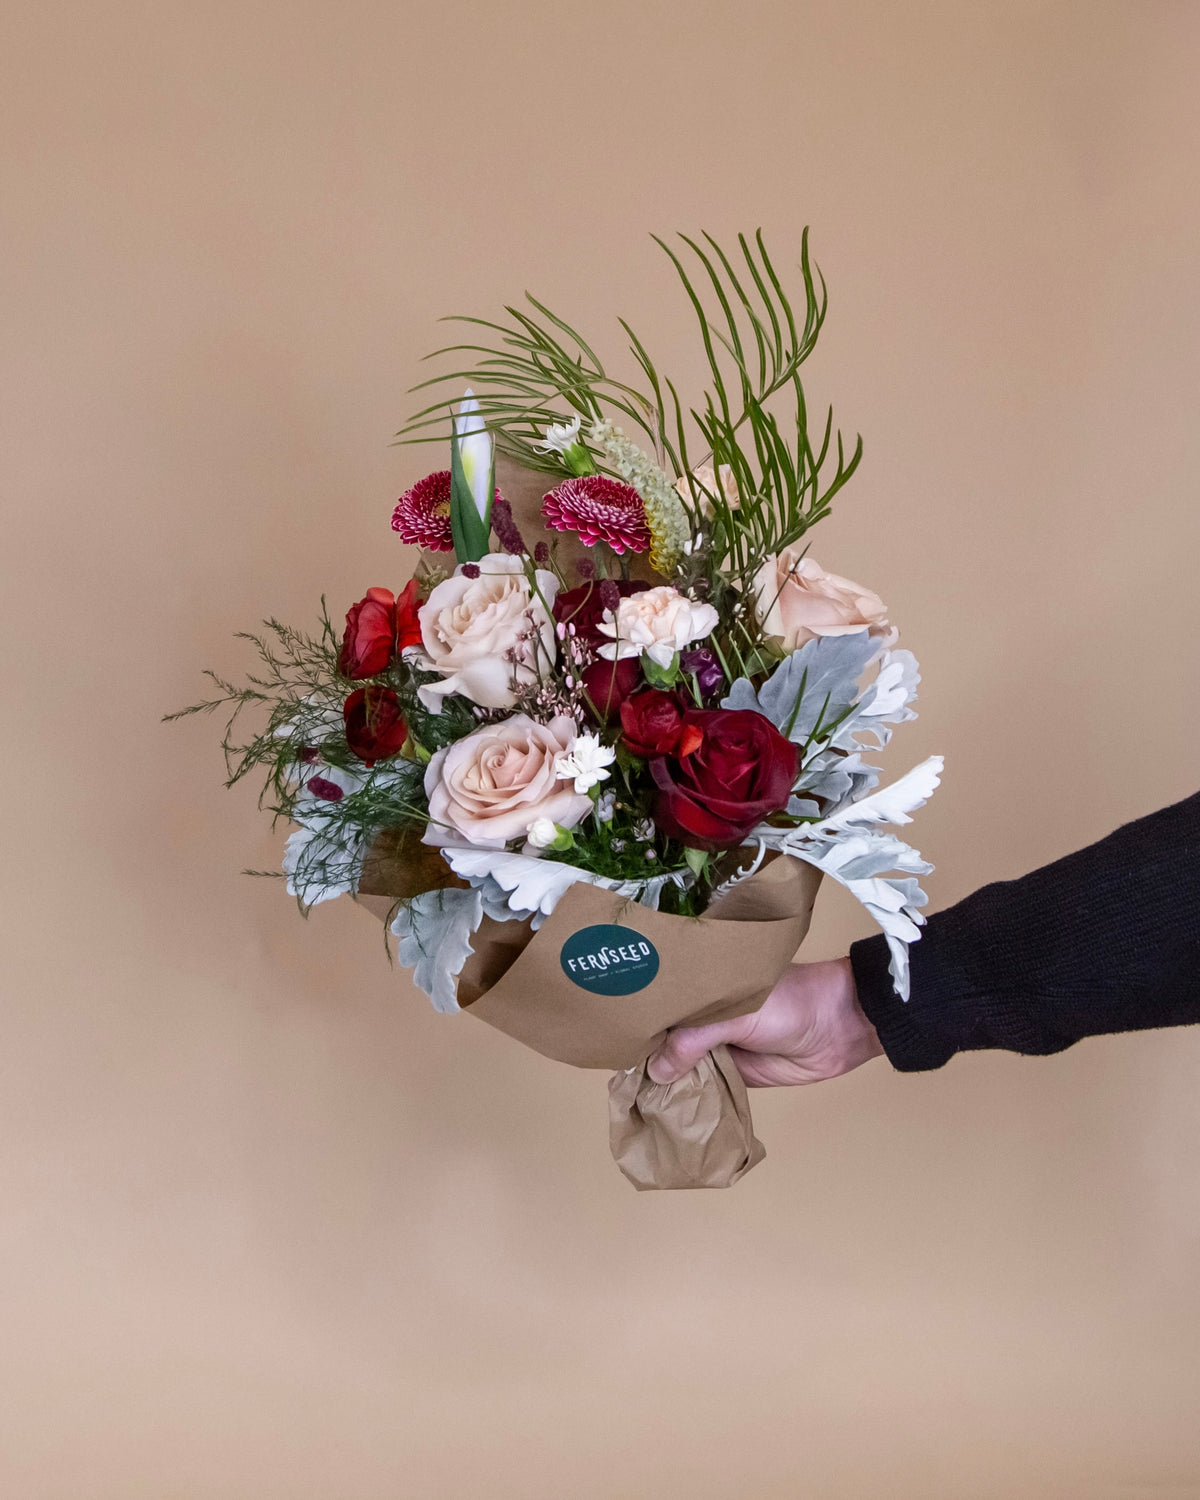 Monthly Flower Subscription: 6 Month